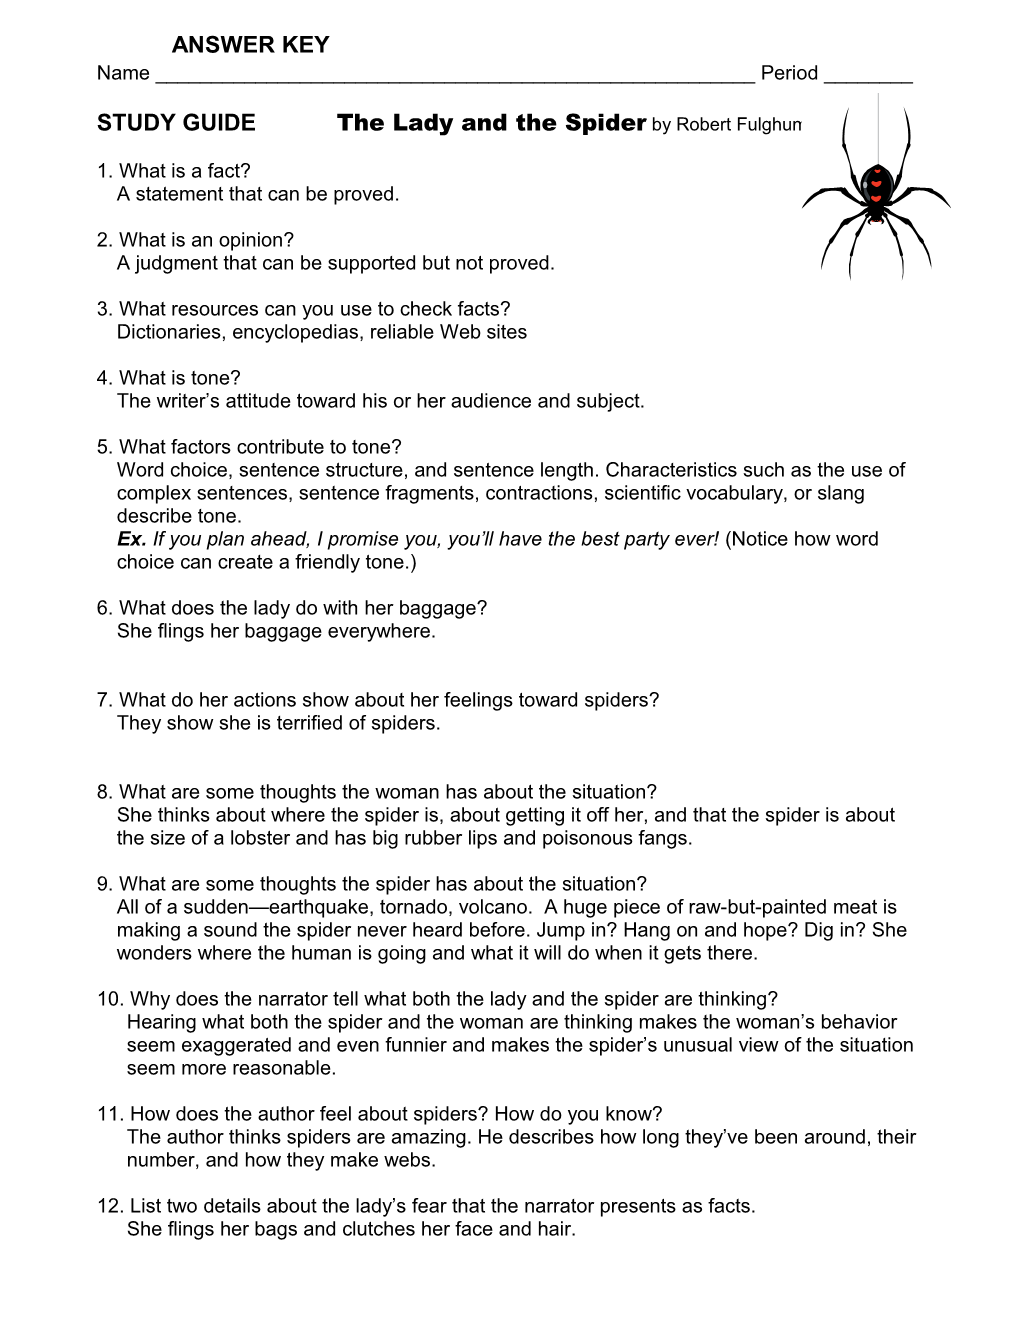 STUDY GUIDE the Lady and the Spider by Robert Fulghum